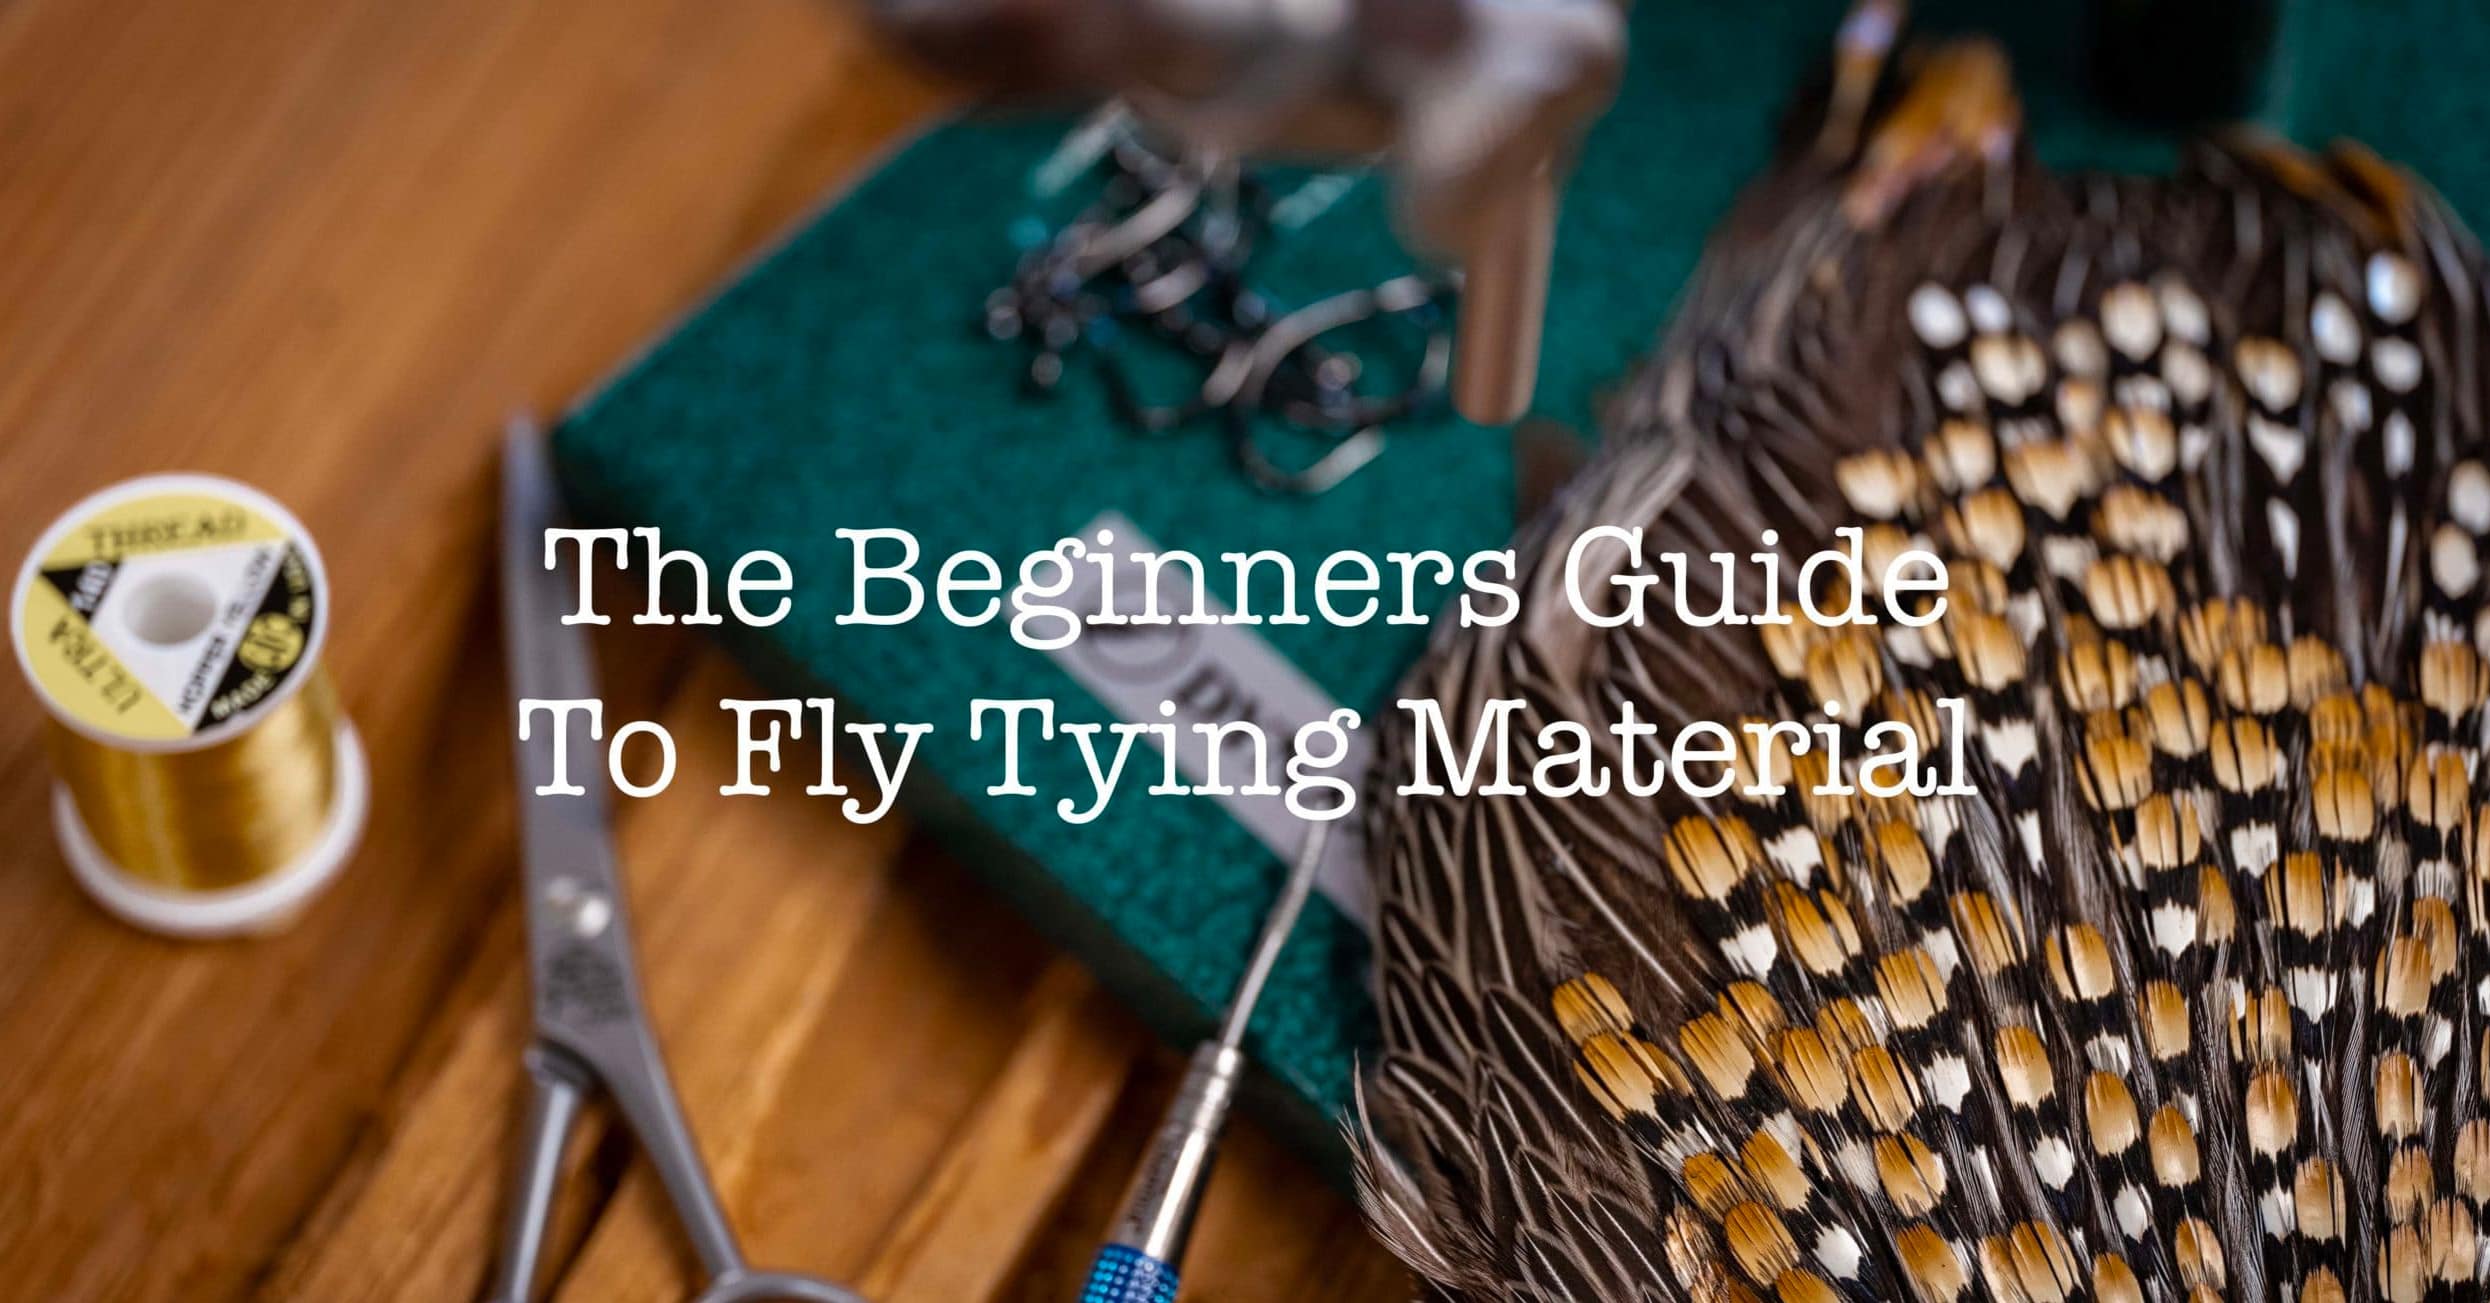 Fly Tying Materials Reviews